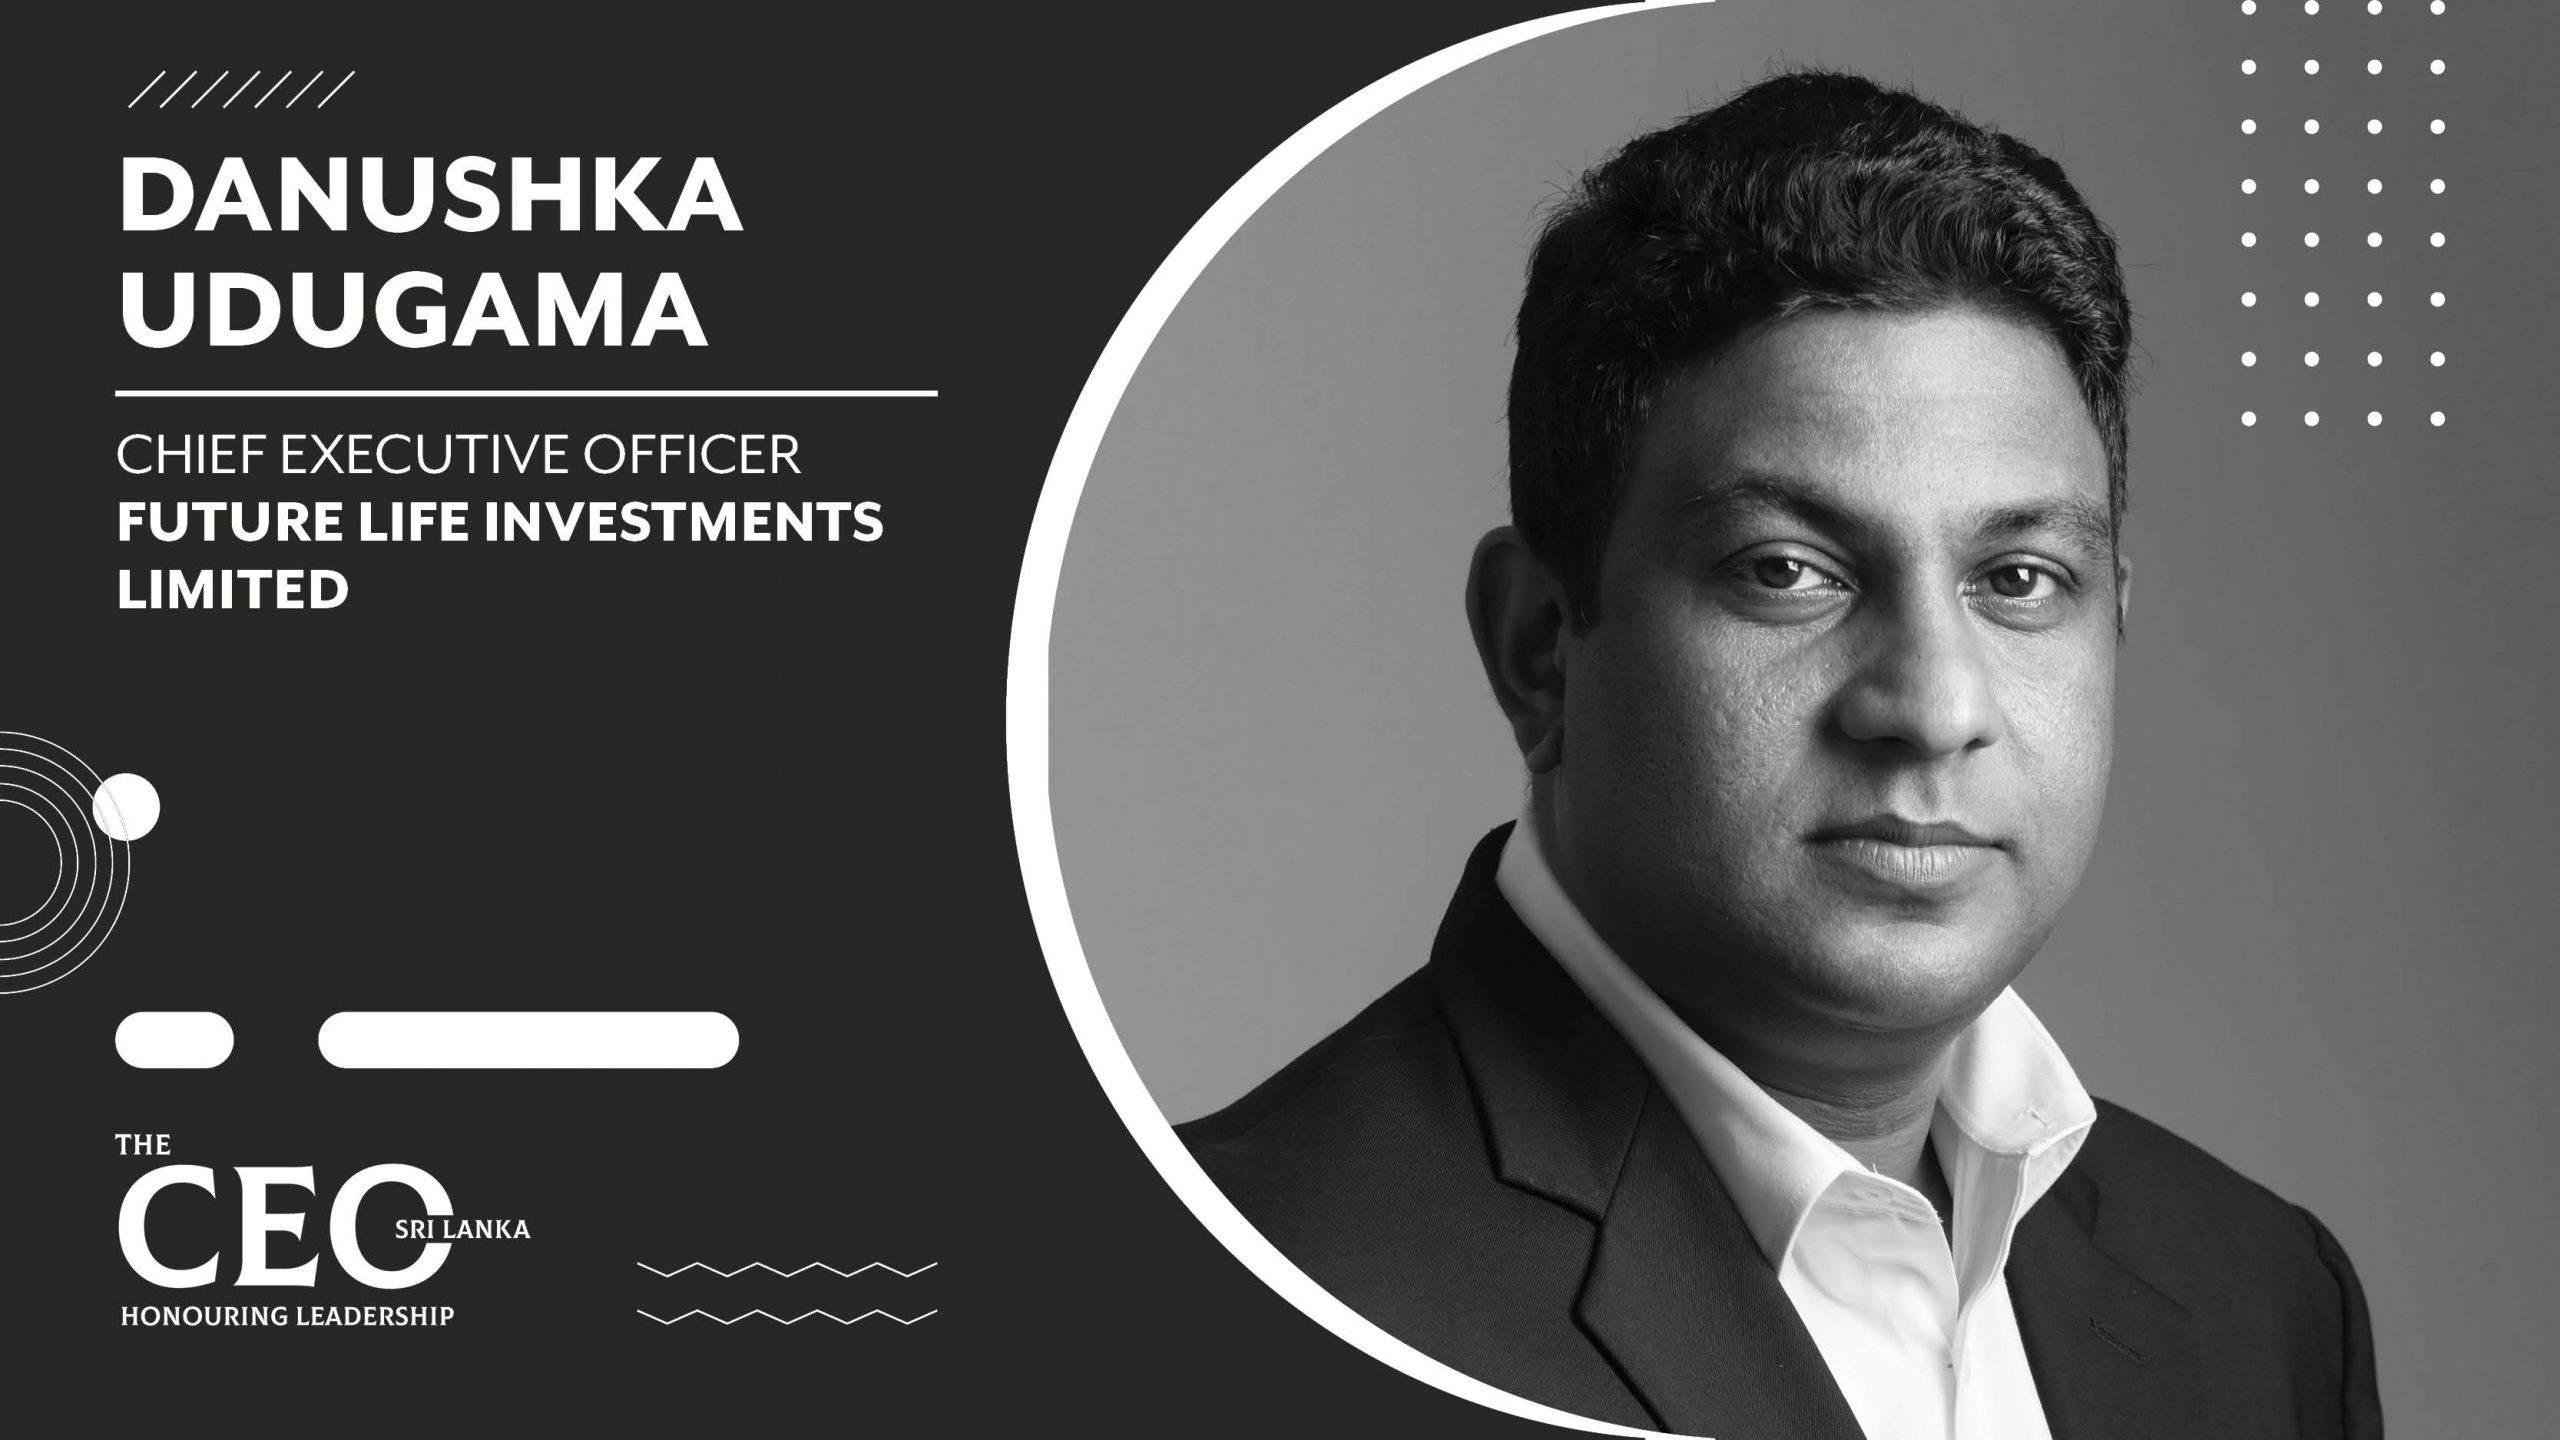 Projecting the New Look of Microfinancing – Chief Executive Officer of Future Life Investments Limited, Danushka Udugama